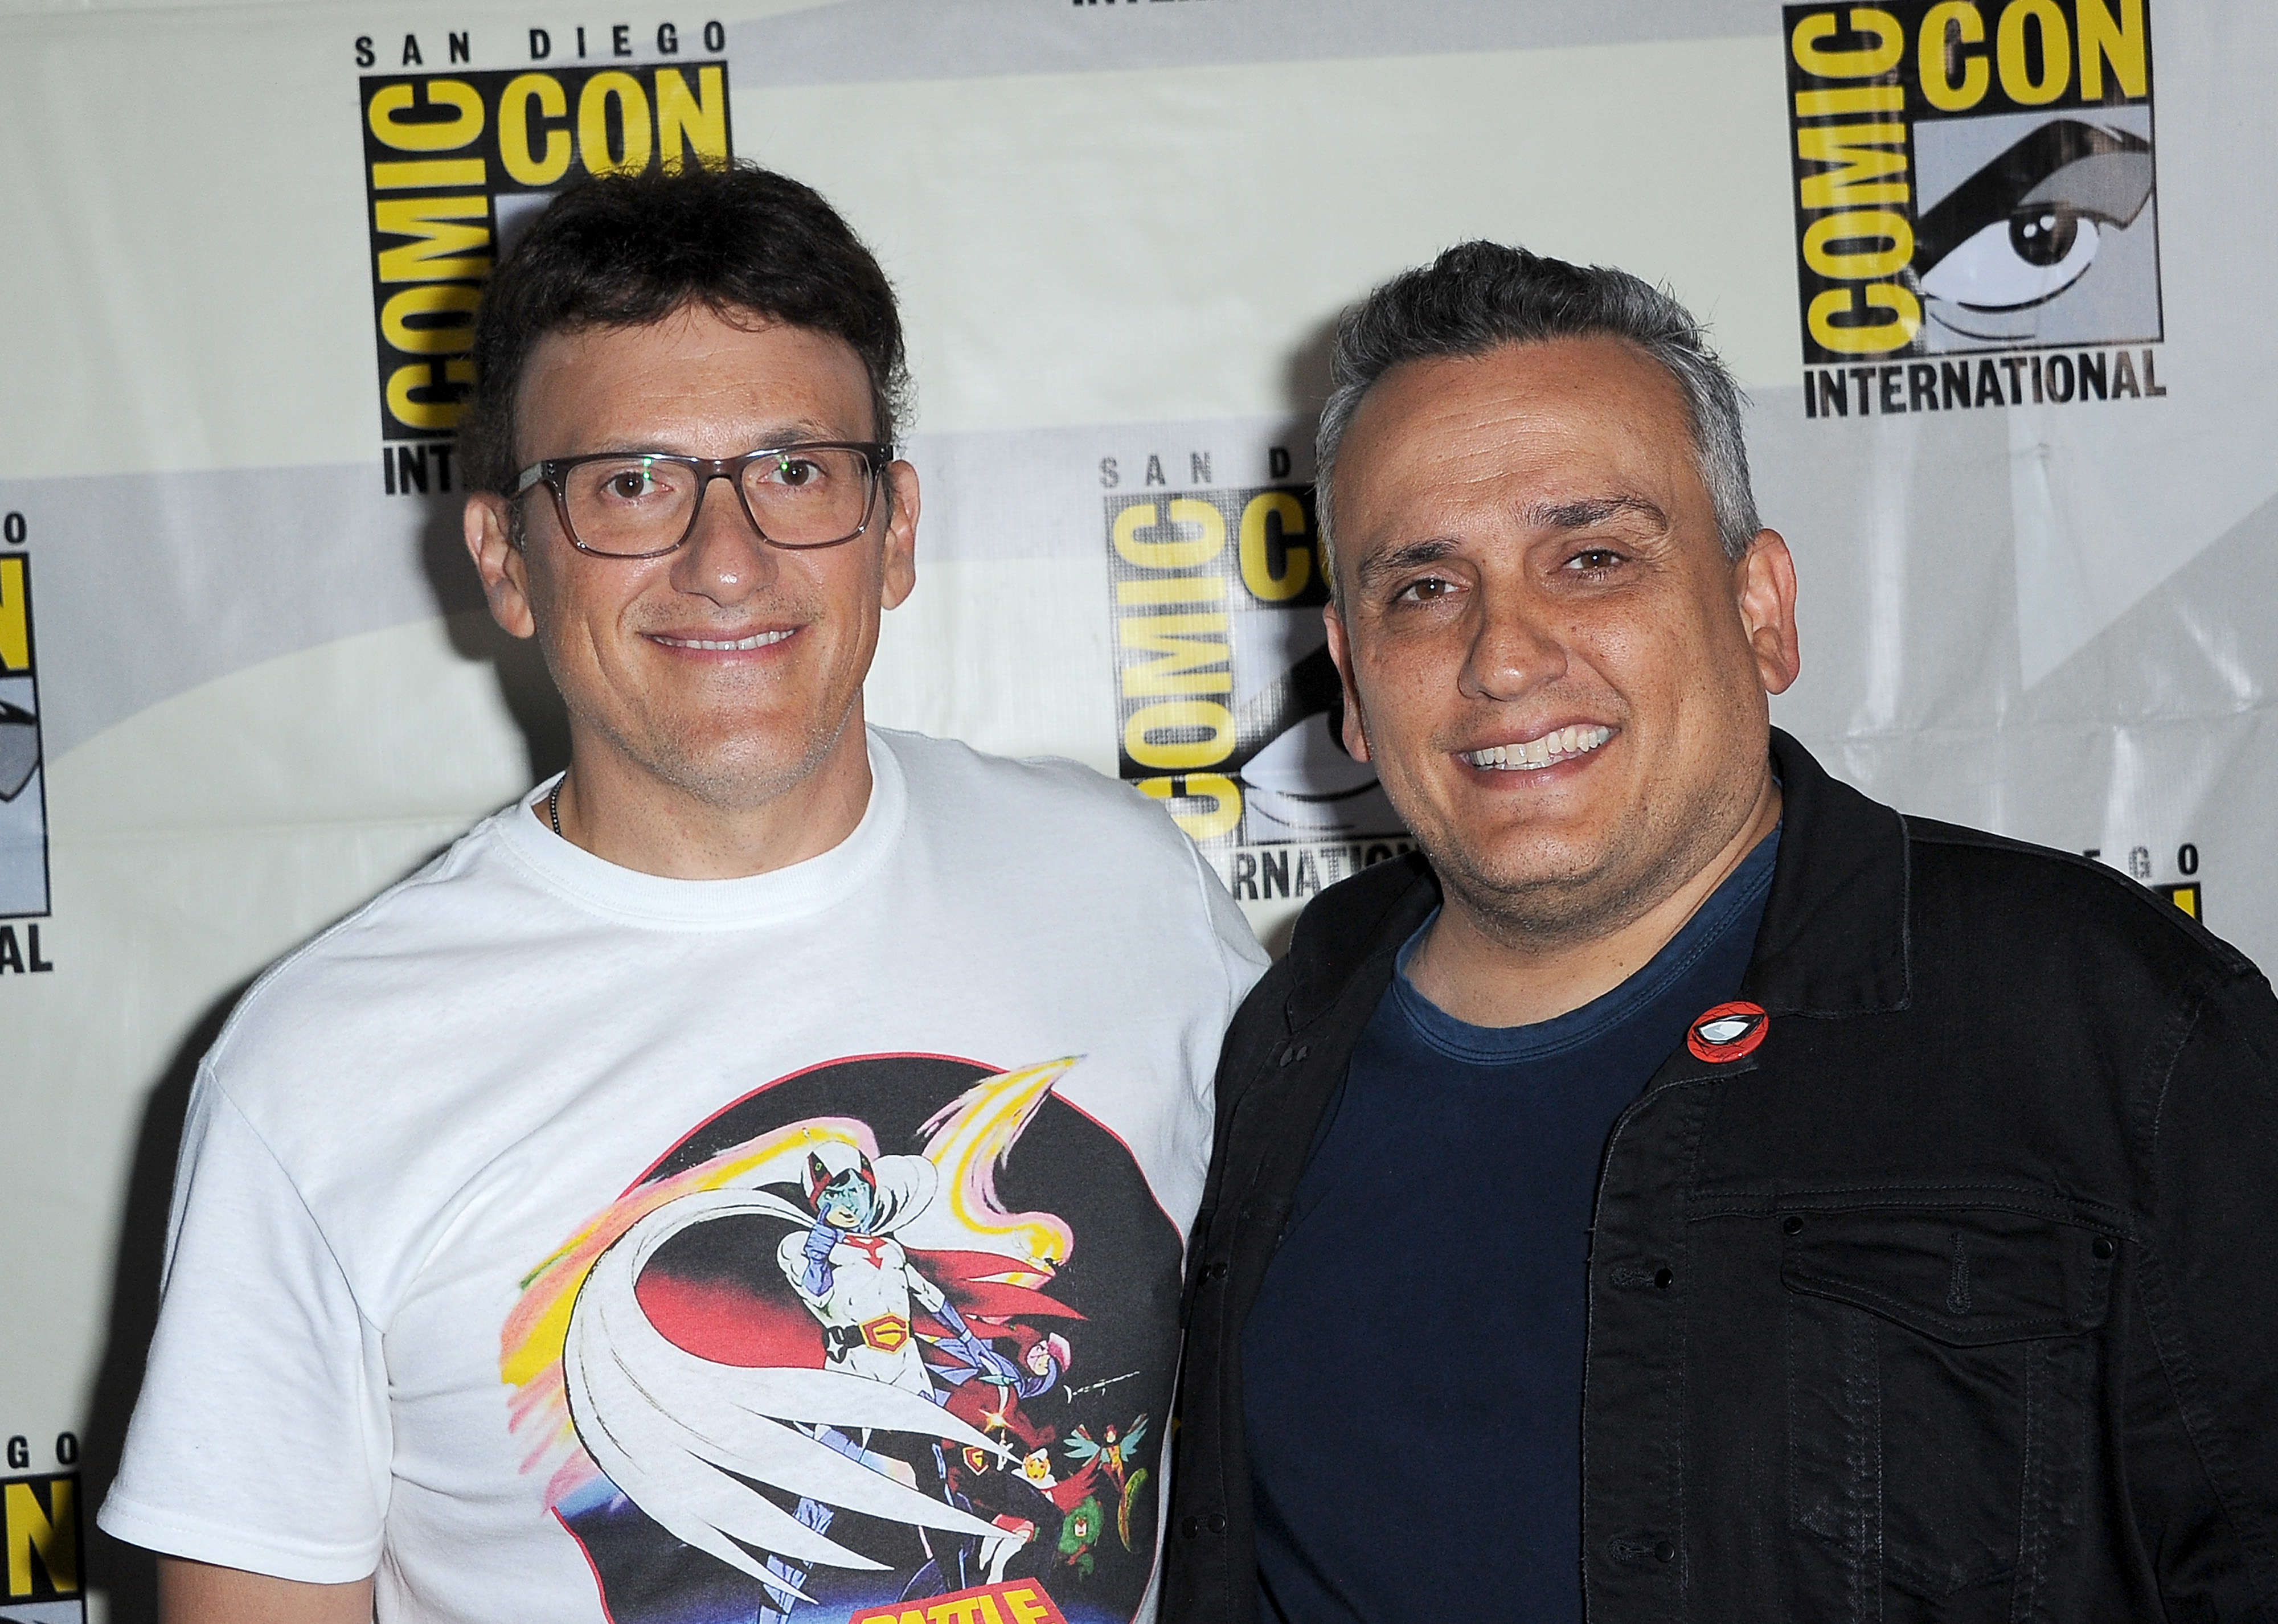 Joe and Anthony Russo